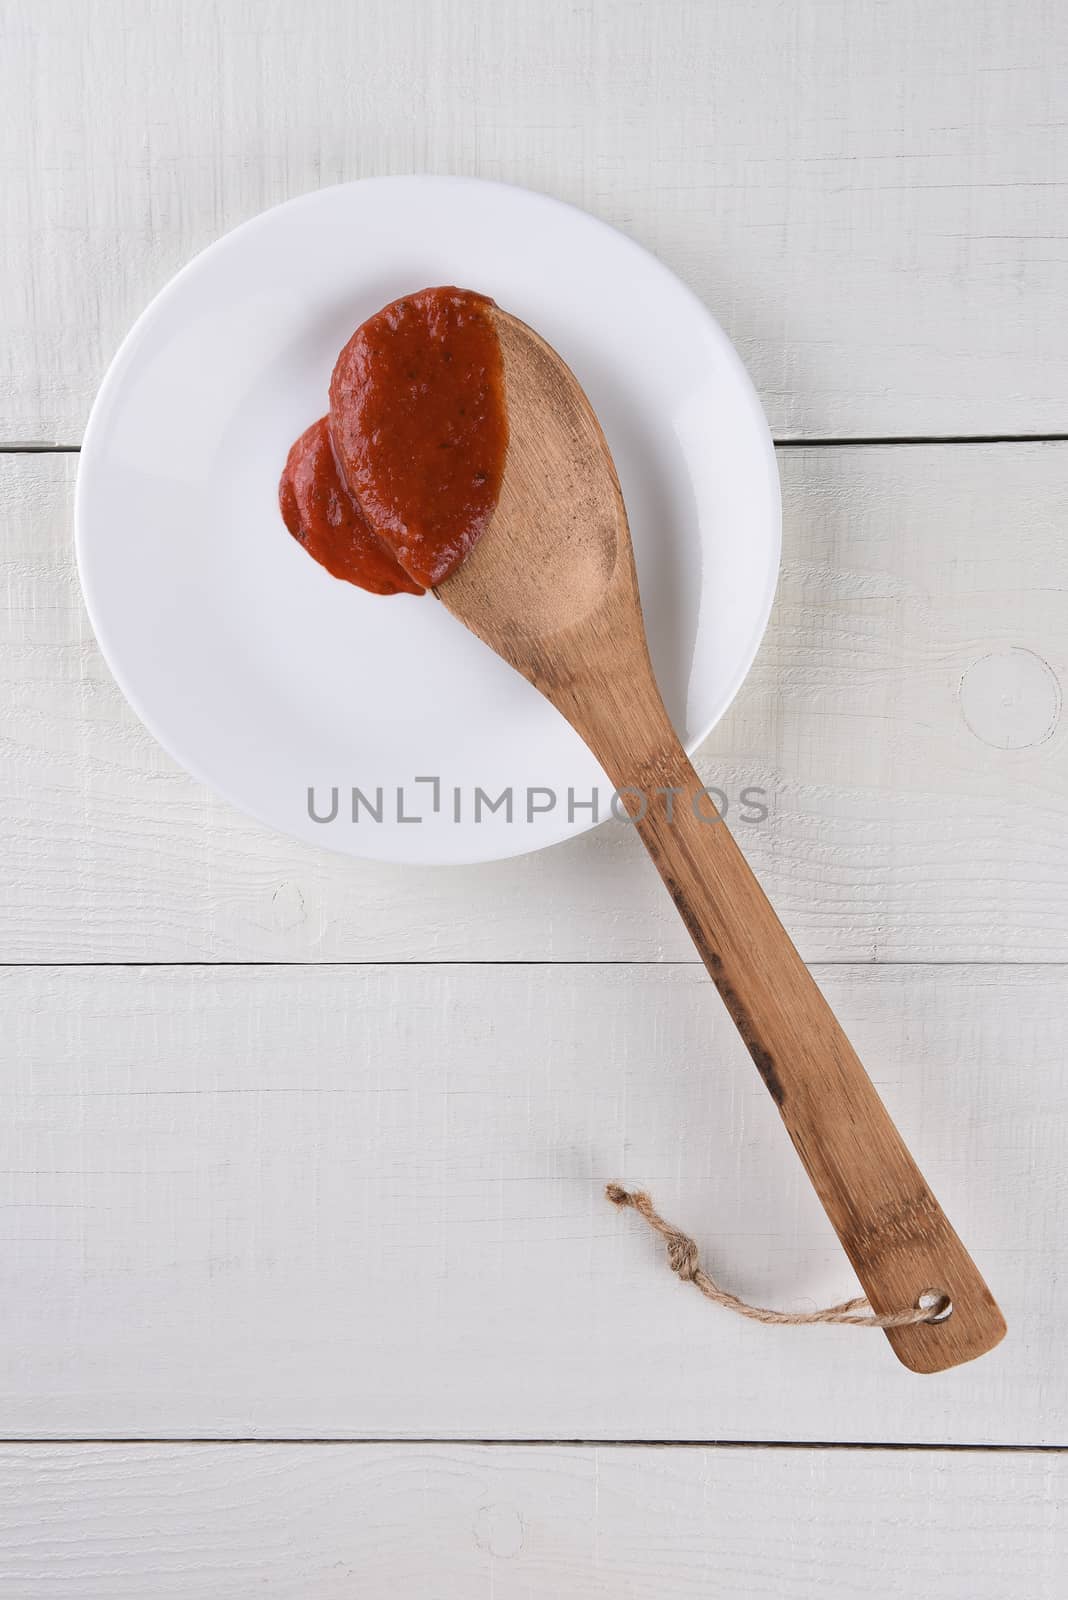 Top view of a wood spoon resting on a white plate with pasta sauce.